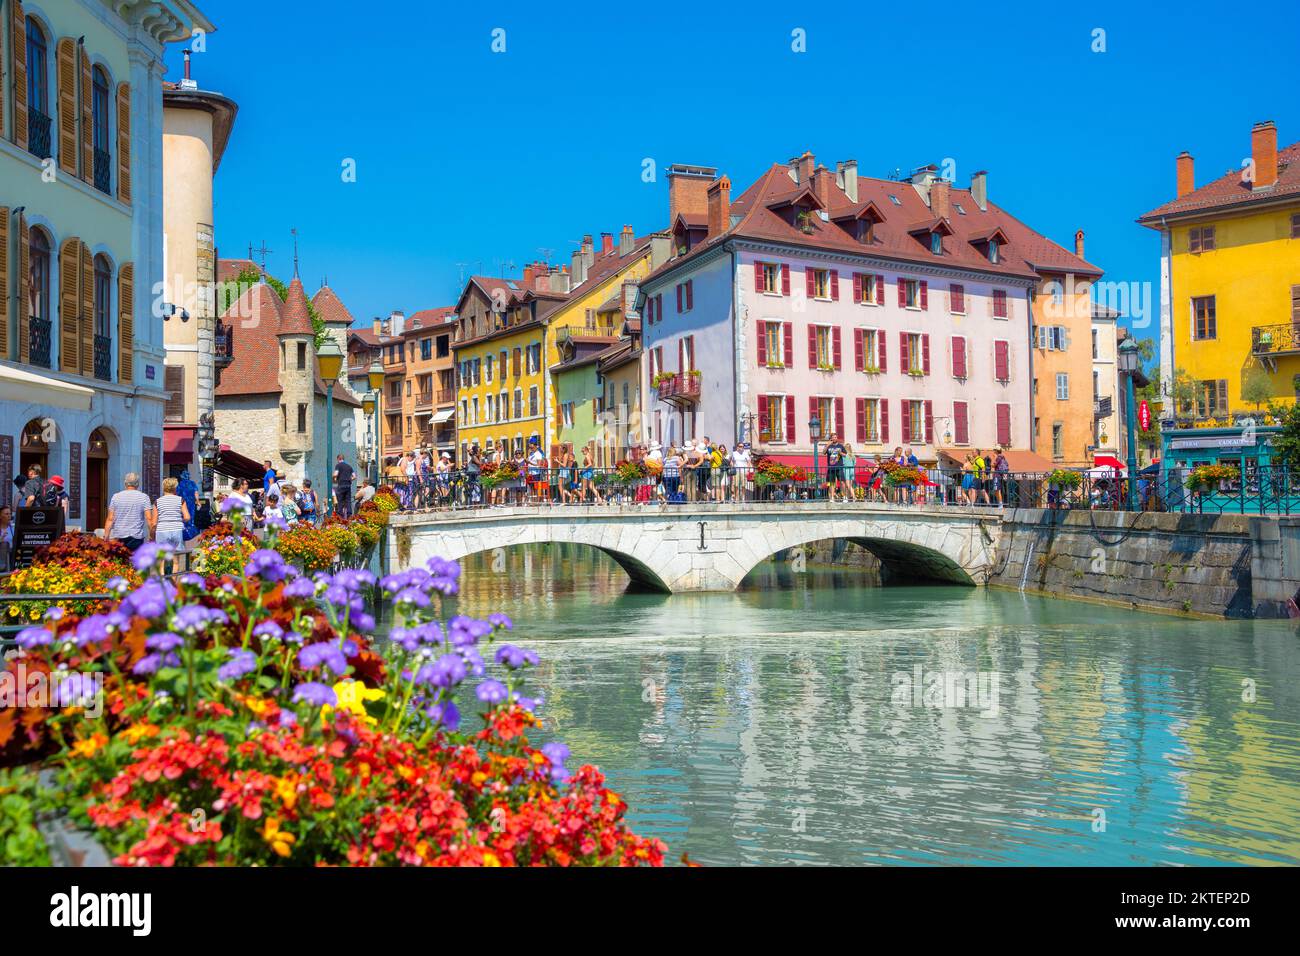 Old town of Annecy with river Thiou, medieval palace the Palais de l'Isle, Annecy, France Stock Photo